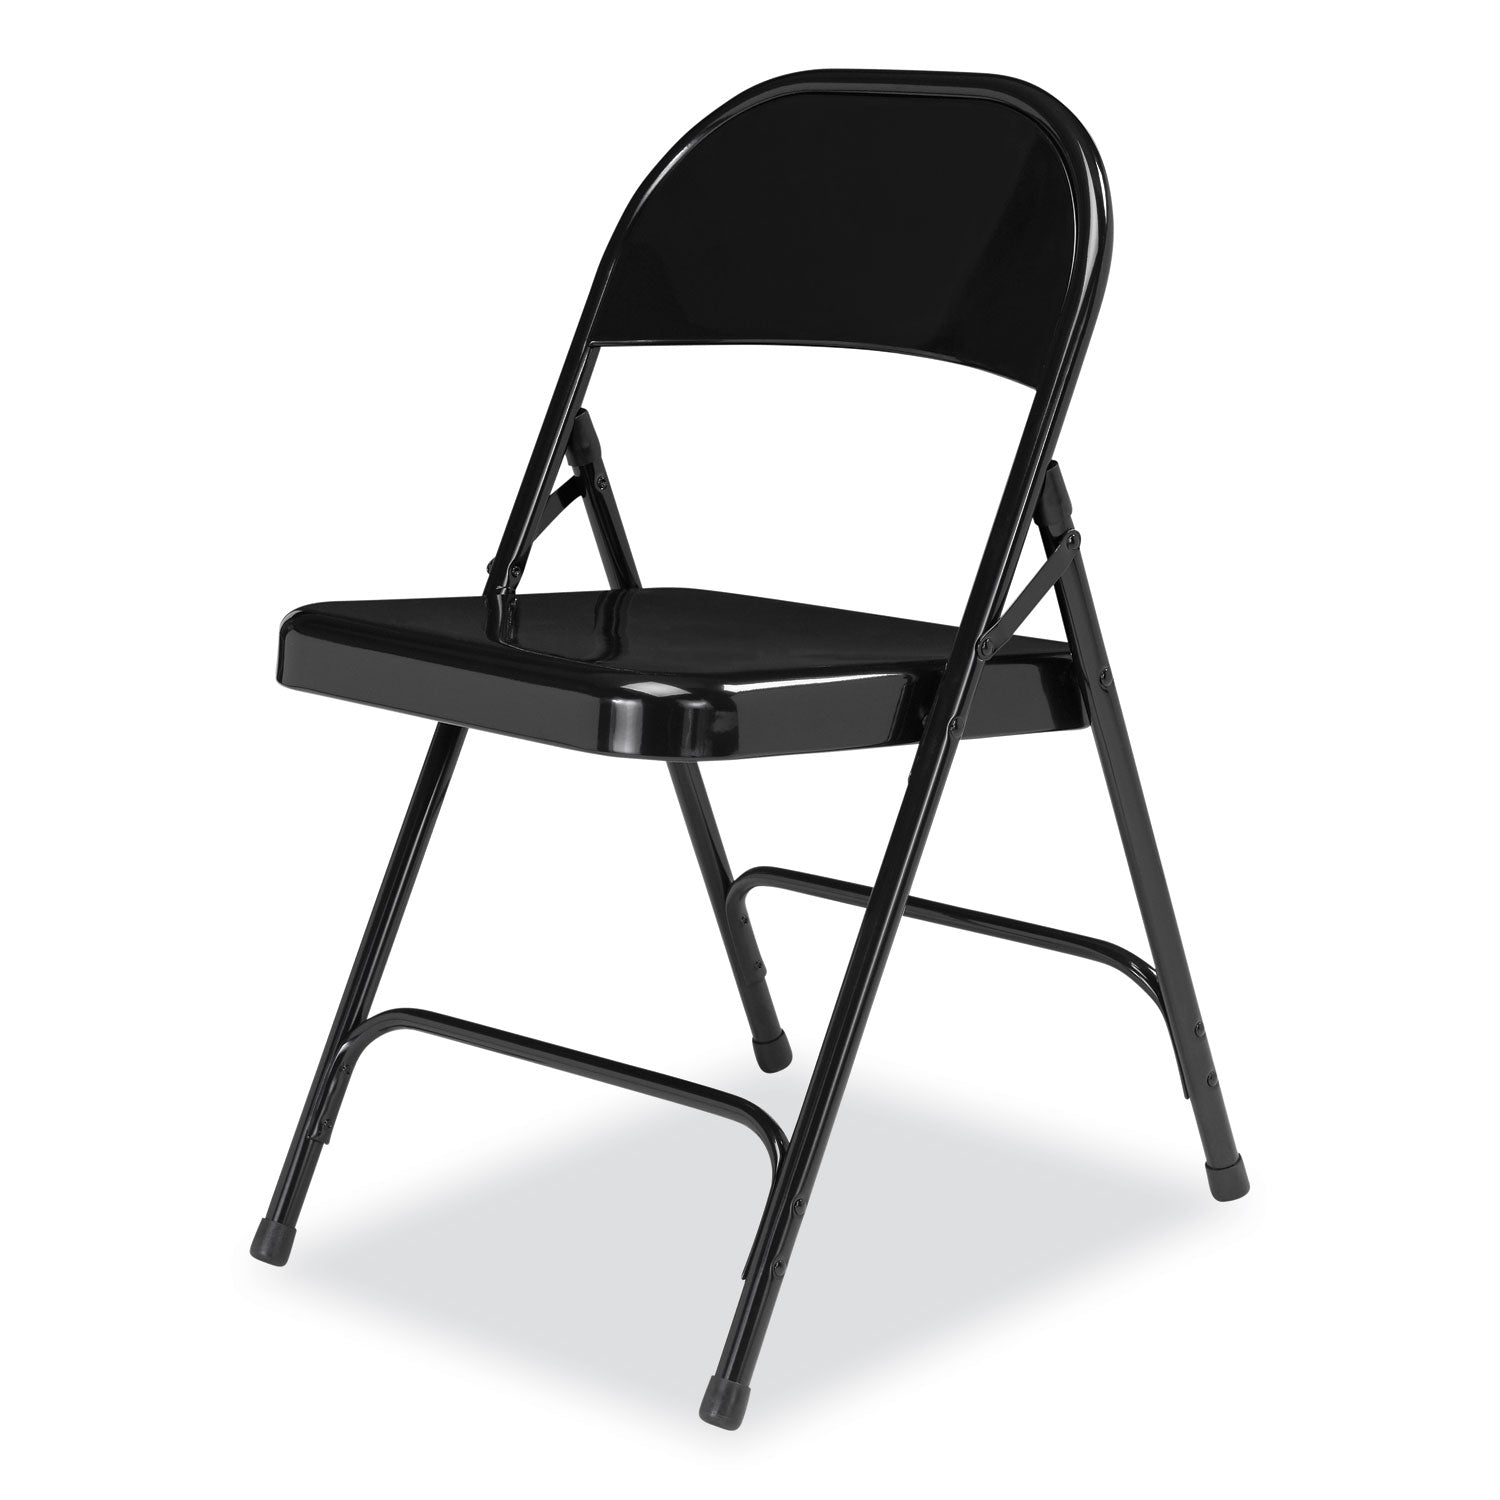 50-series-all-steel-folding-chair-supports-500-lb-1675-seat-height-black-seat-back-base-4-ctships-in-1-3-business-days_nps510 - 3